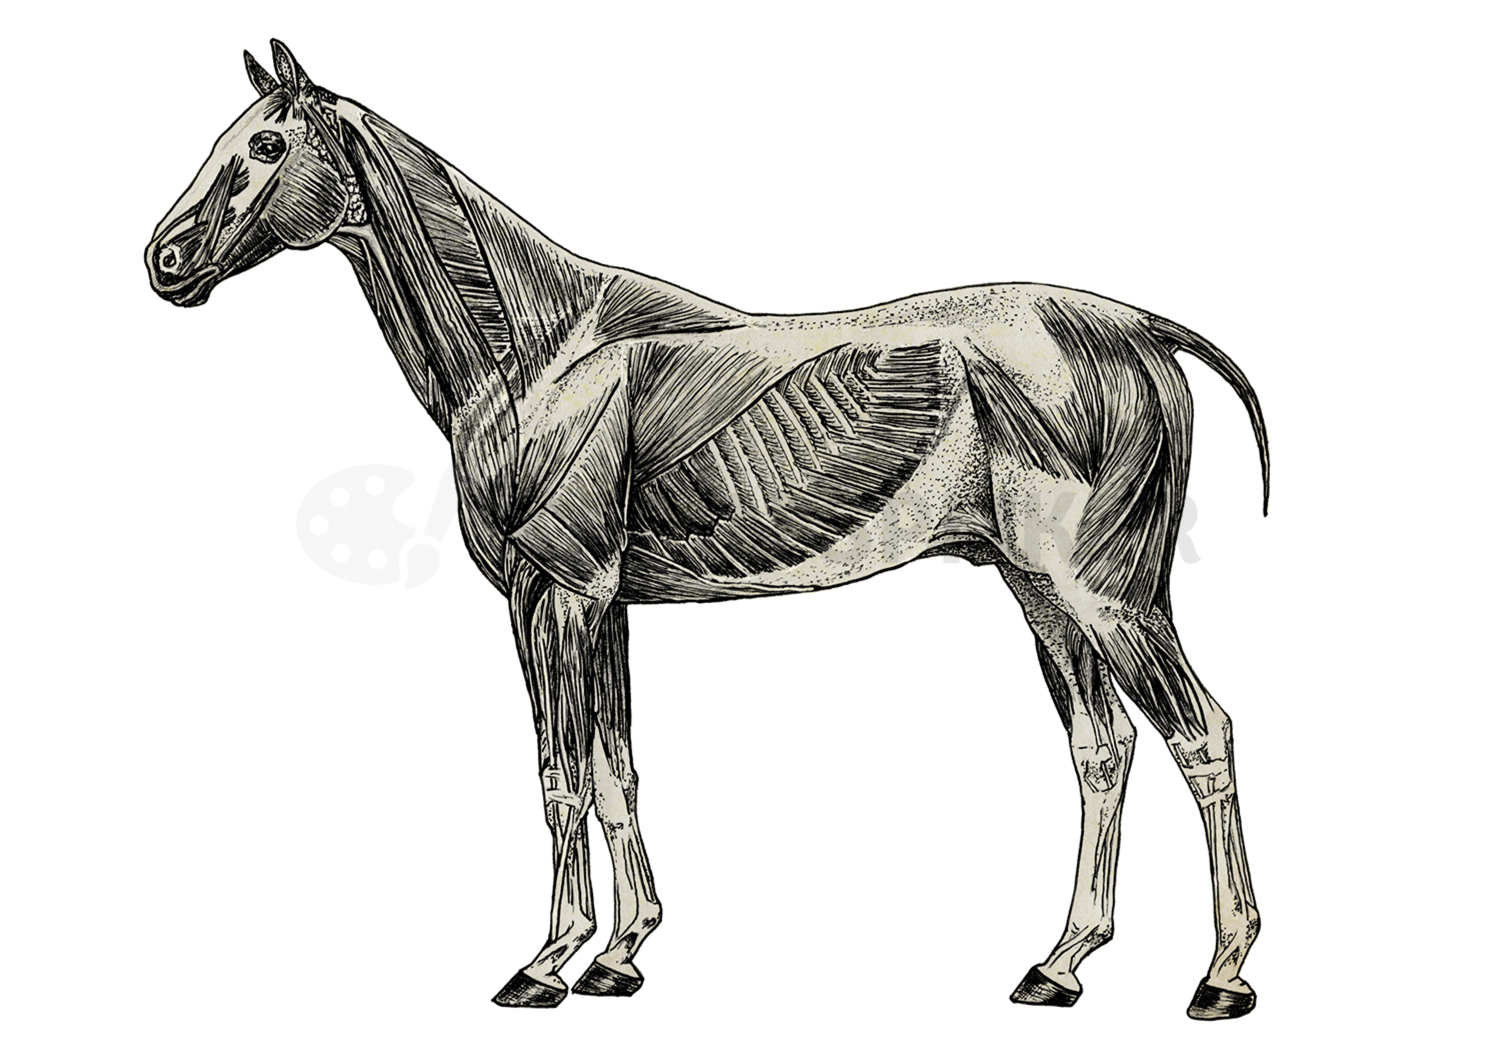 Horse superficial muscles